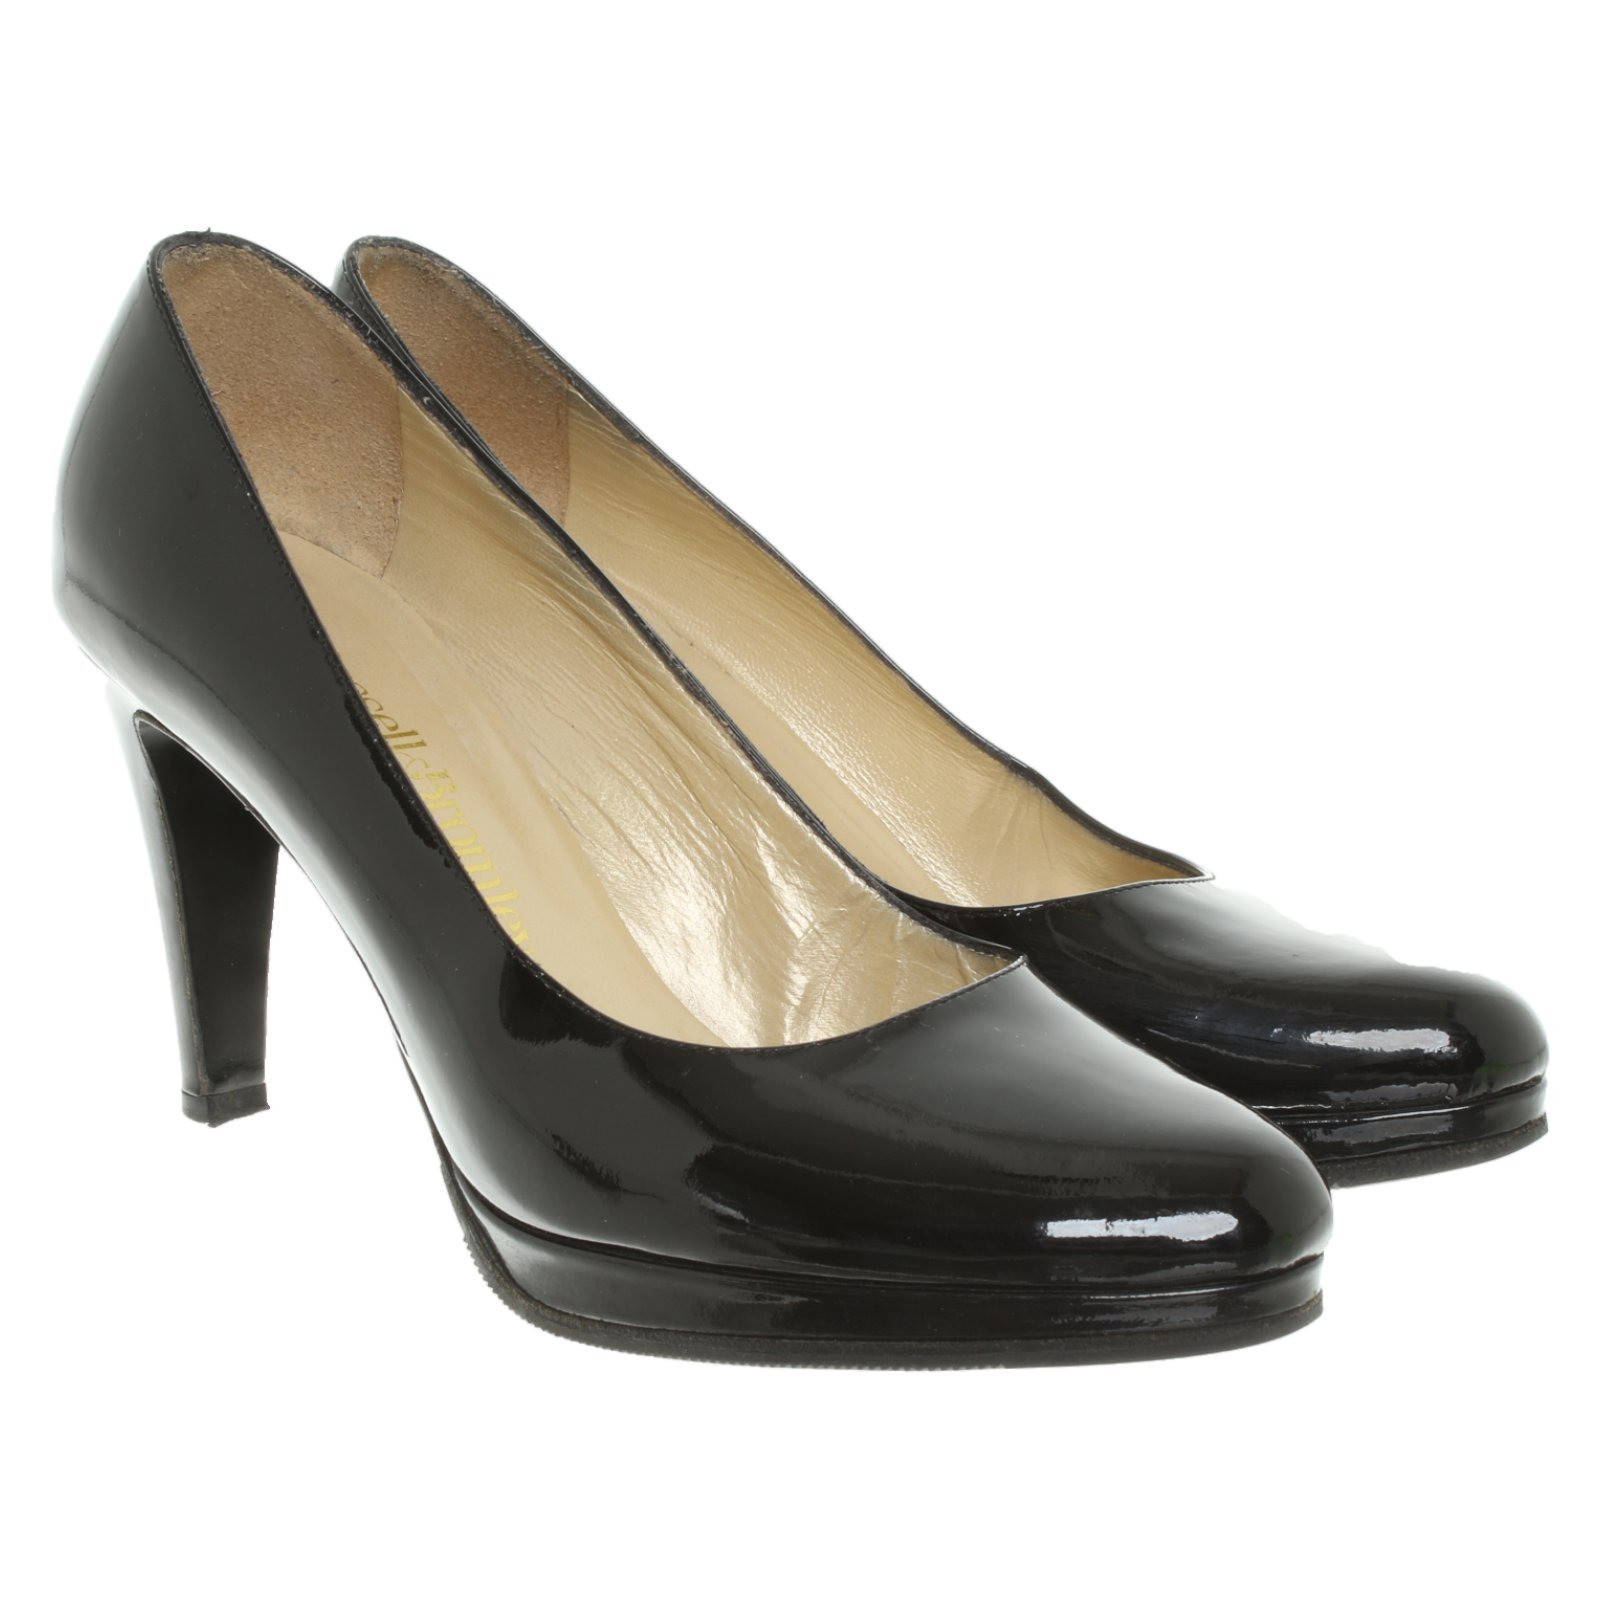 Russell & Bromley Pumps/Peeptoes Patent leather in Black - Second Hand  Russell & Bromley Pumps/Peeptoes Patent leather in Black buy used for 128€  (3298382)